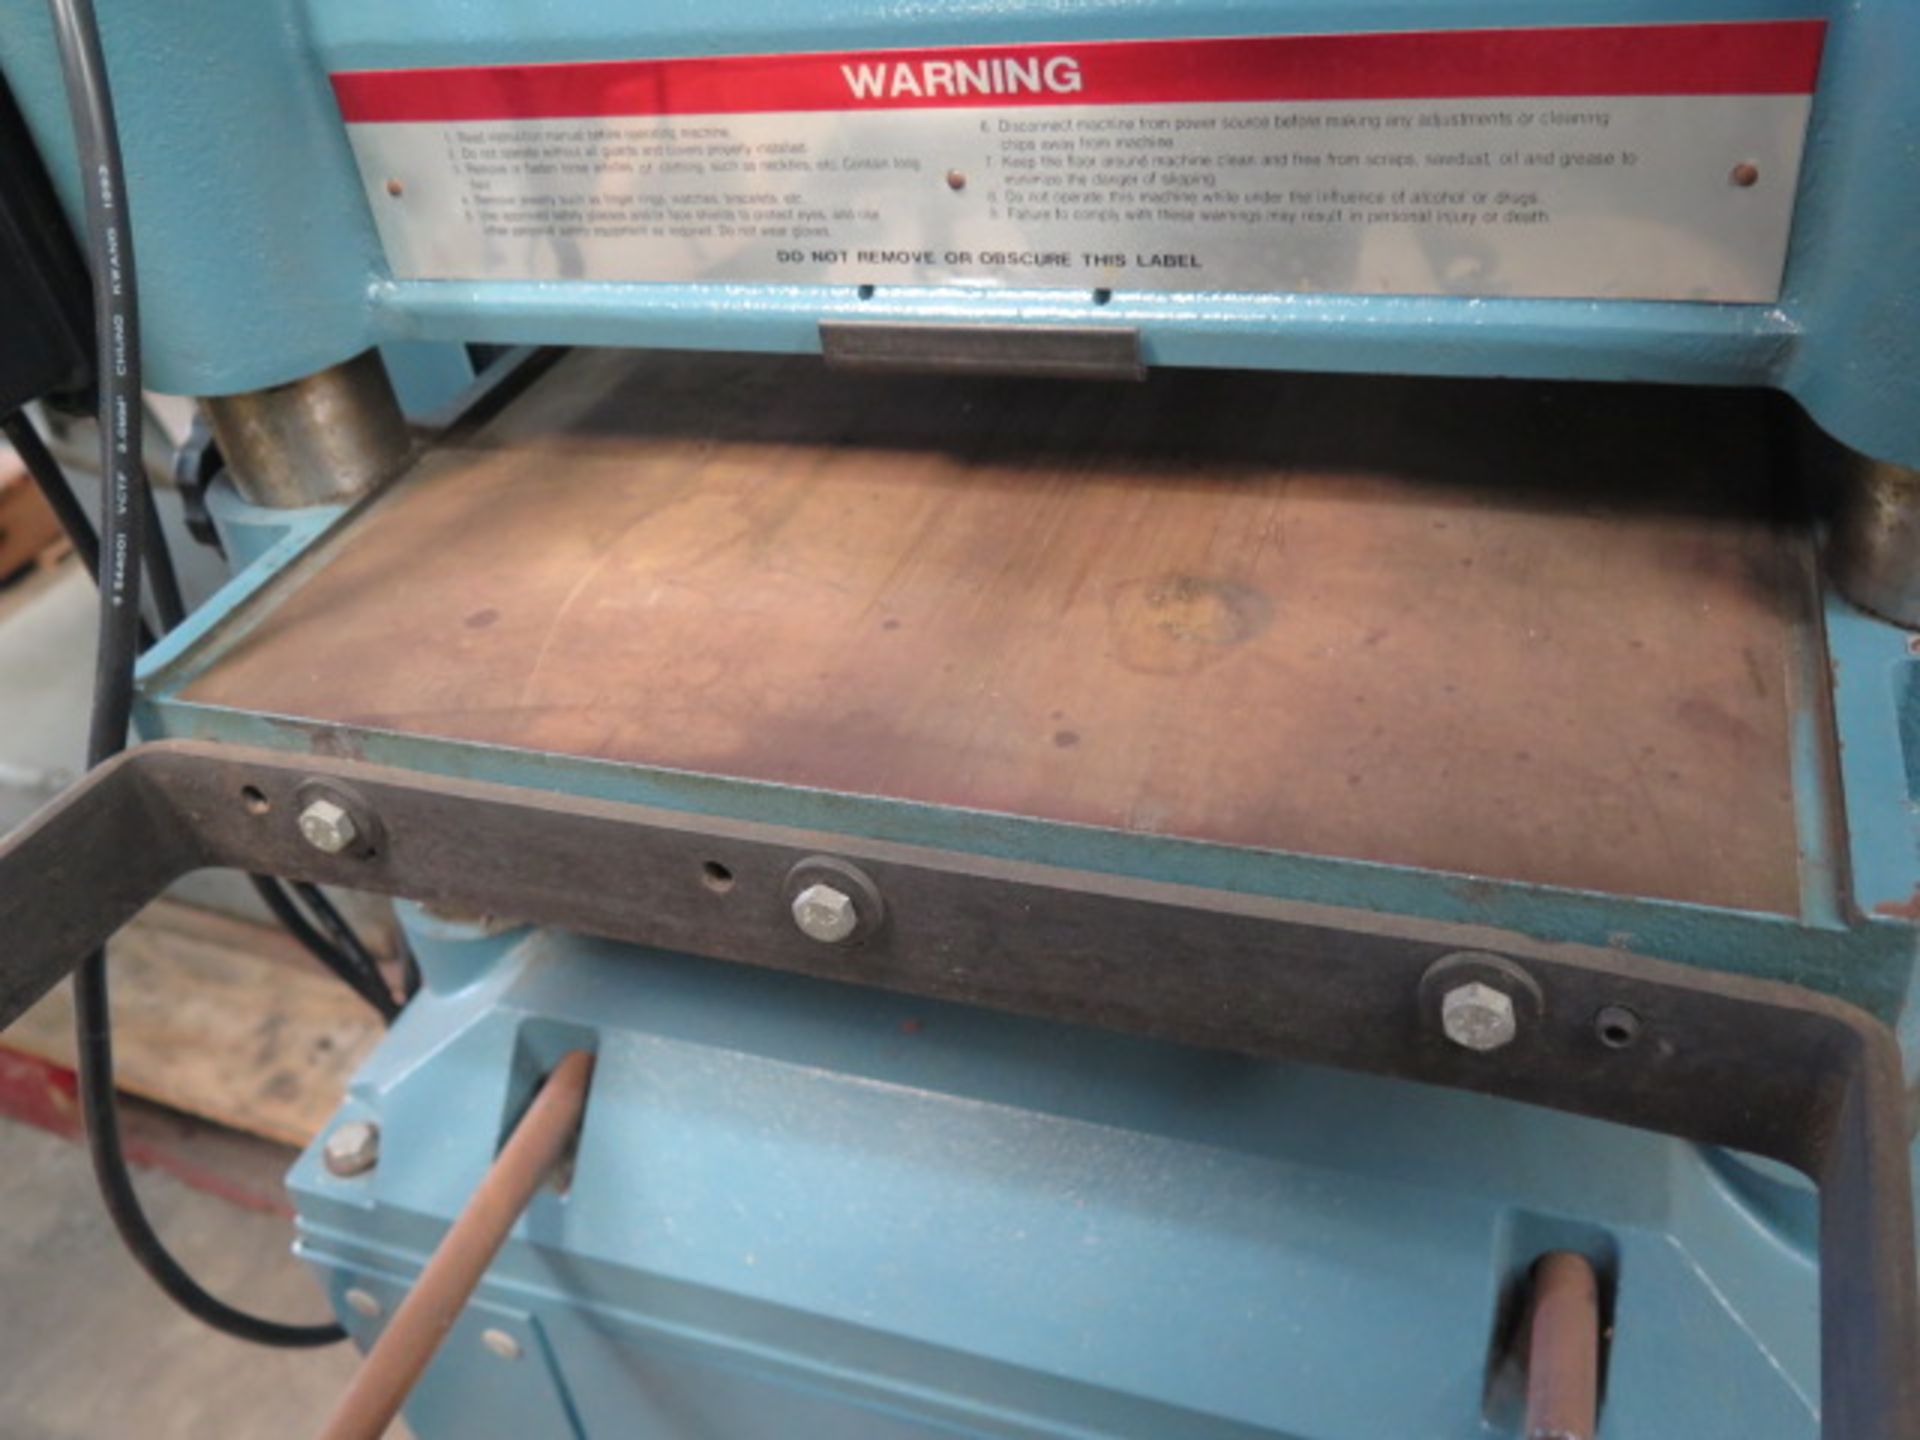 Jet JWP-15HO 15” Wood Planer w/ Rolling Stand (SOLD AS-IS - NO WARRANTY) - Image 5 of 8